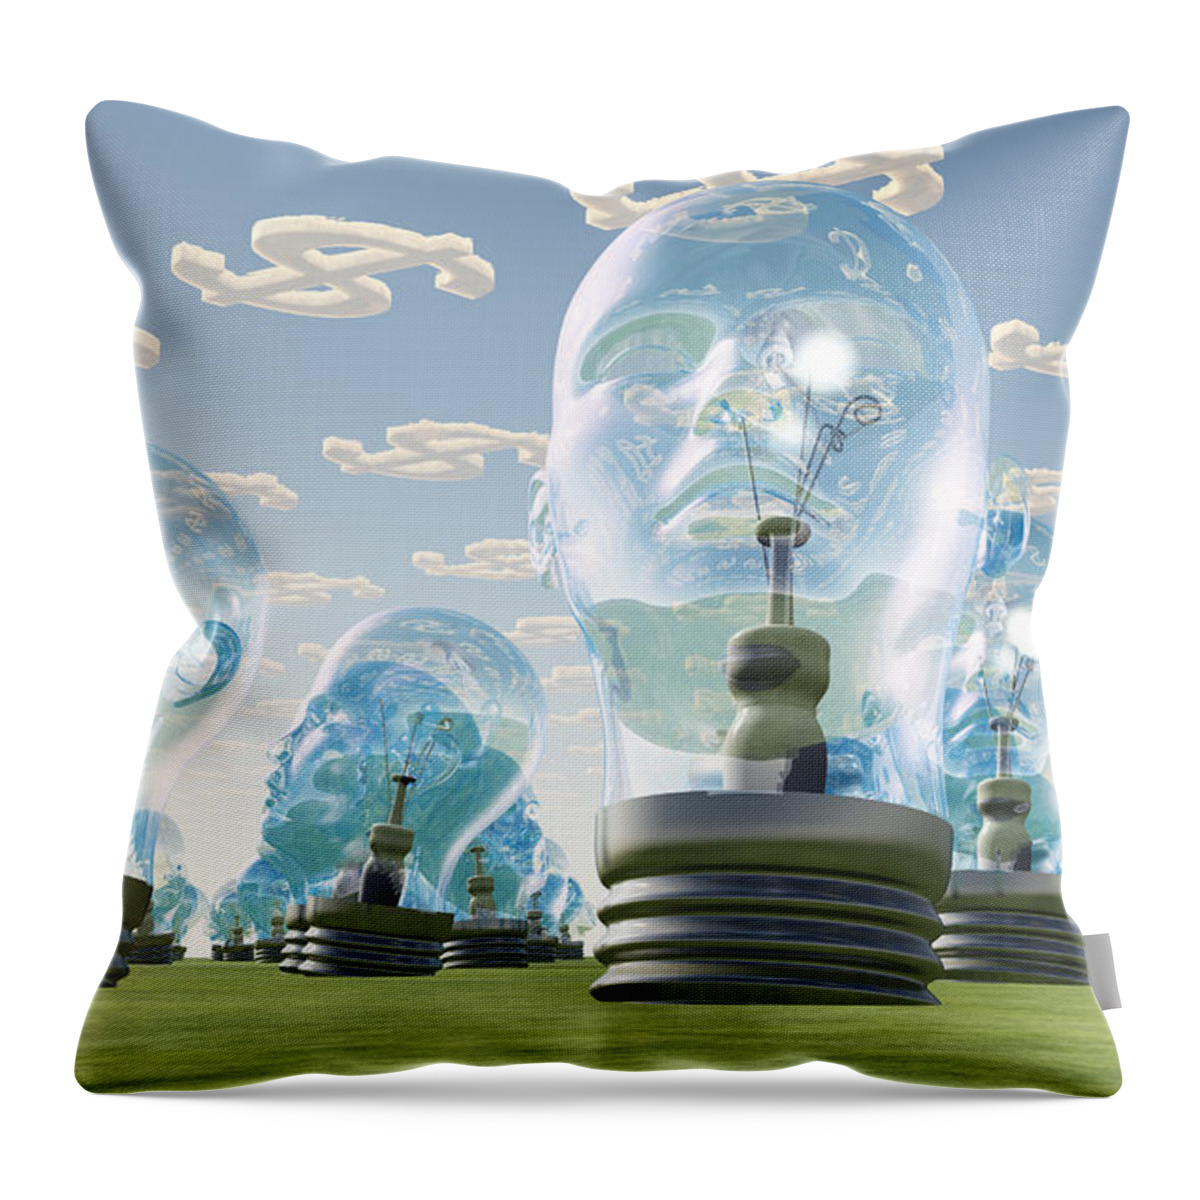 Idea Throw Pillow featuring the digital art Light Bulb heads and dollar symbol clouds by Bruce Rolff